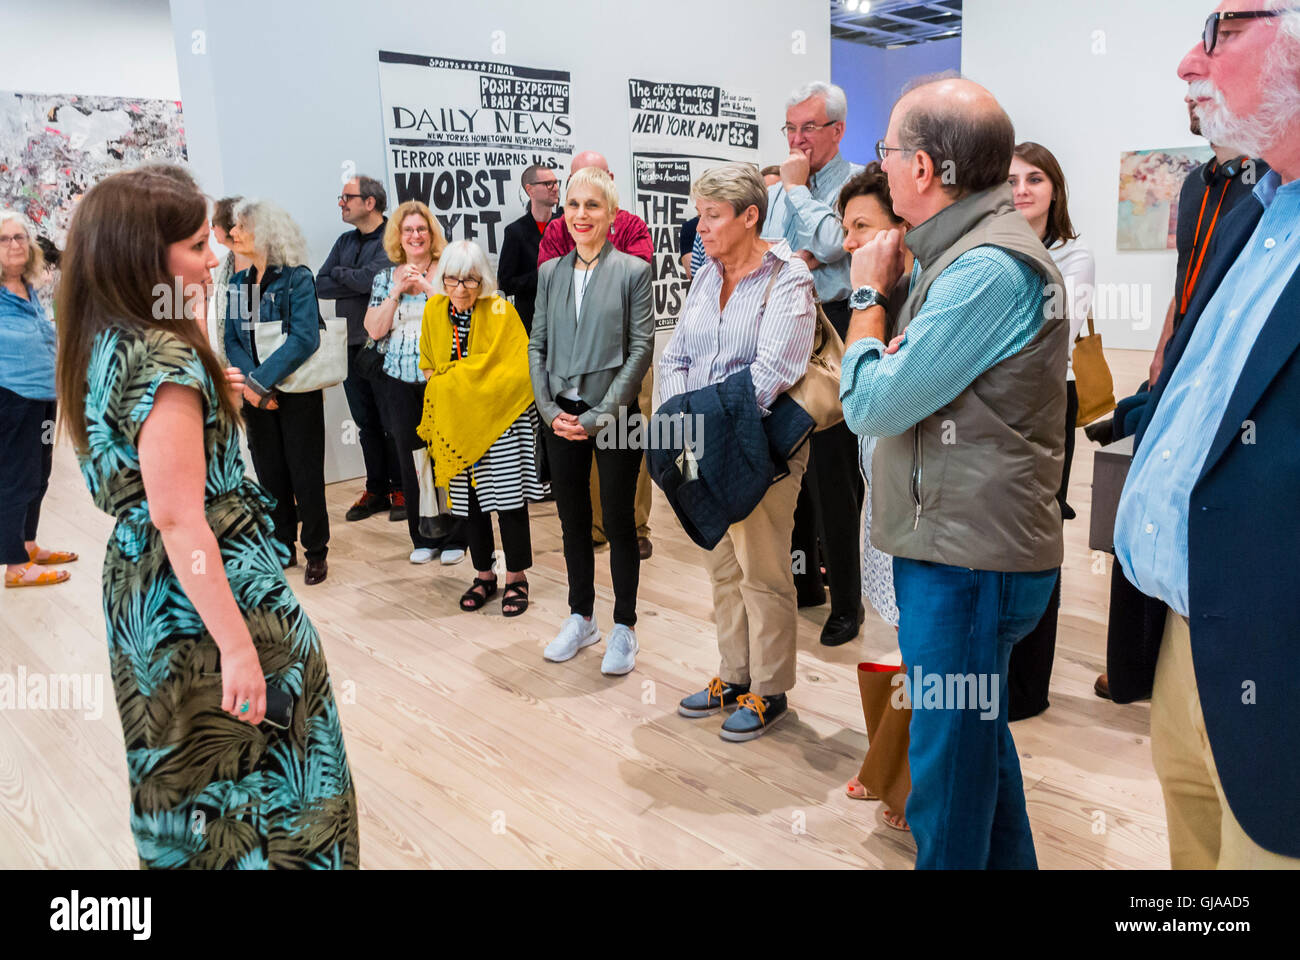 New York City, NY, USA, Crowd of Tourists Listening to Tour Guide leading group in Modern American Art Gallery, Downtown Whitney Museum, women giving talk Stock Photo